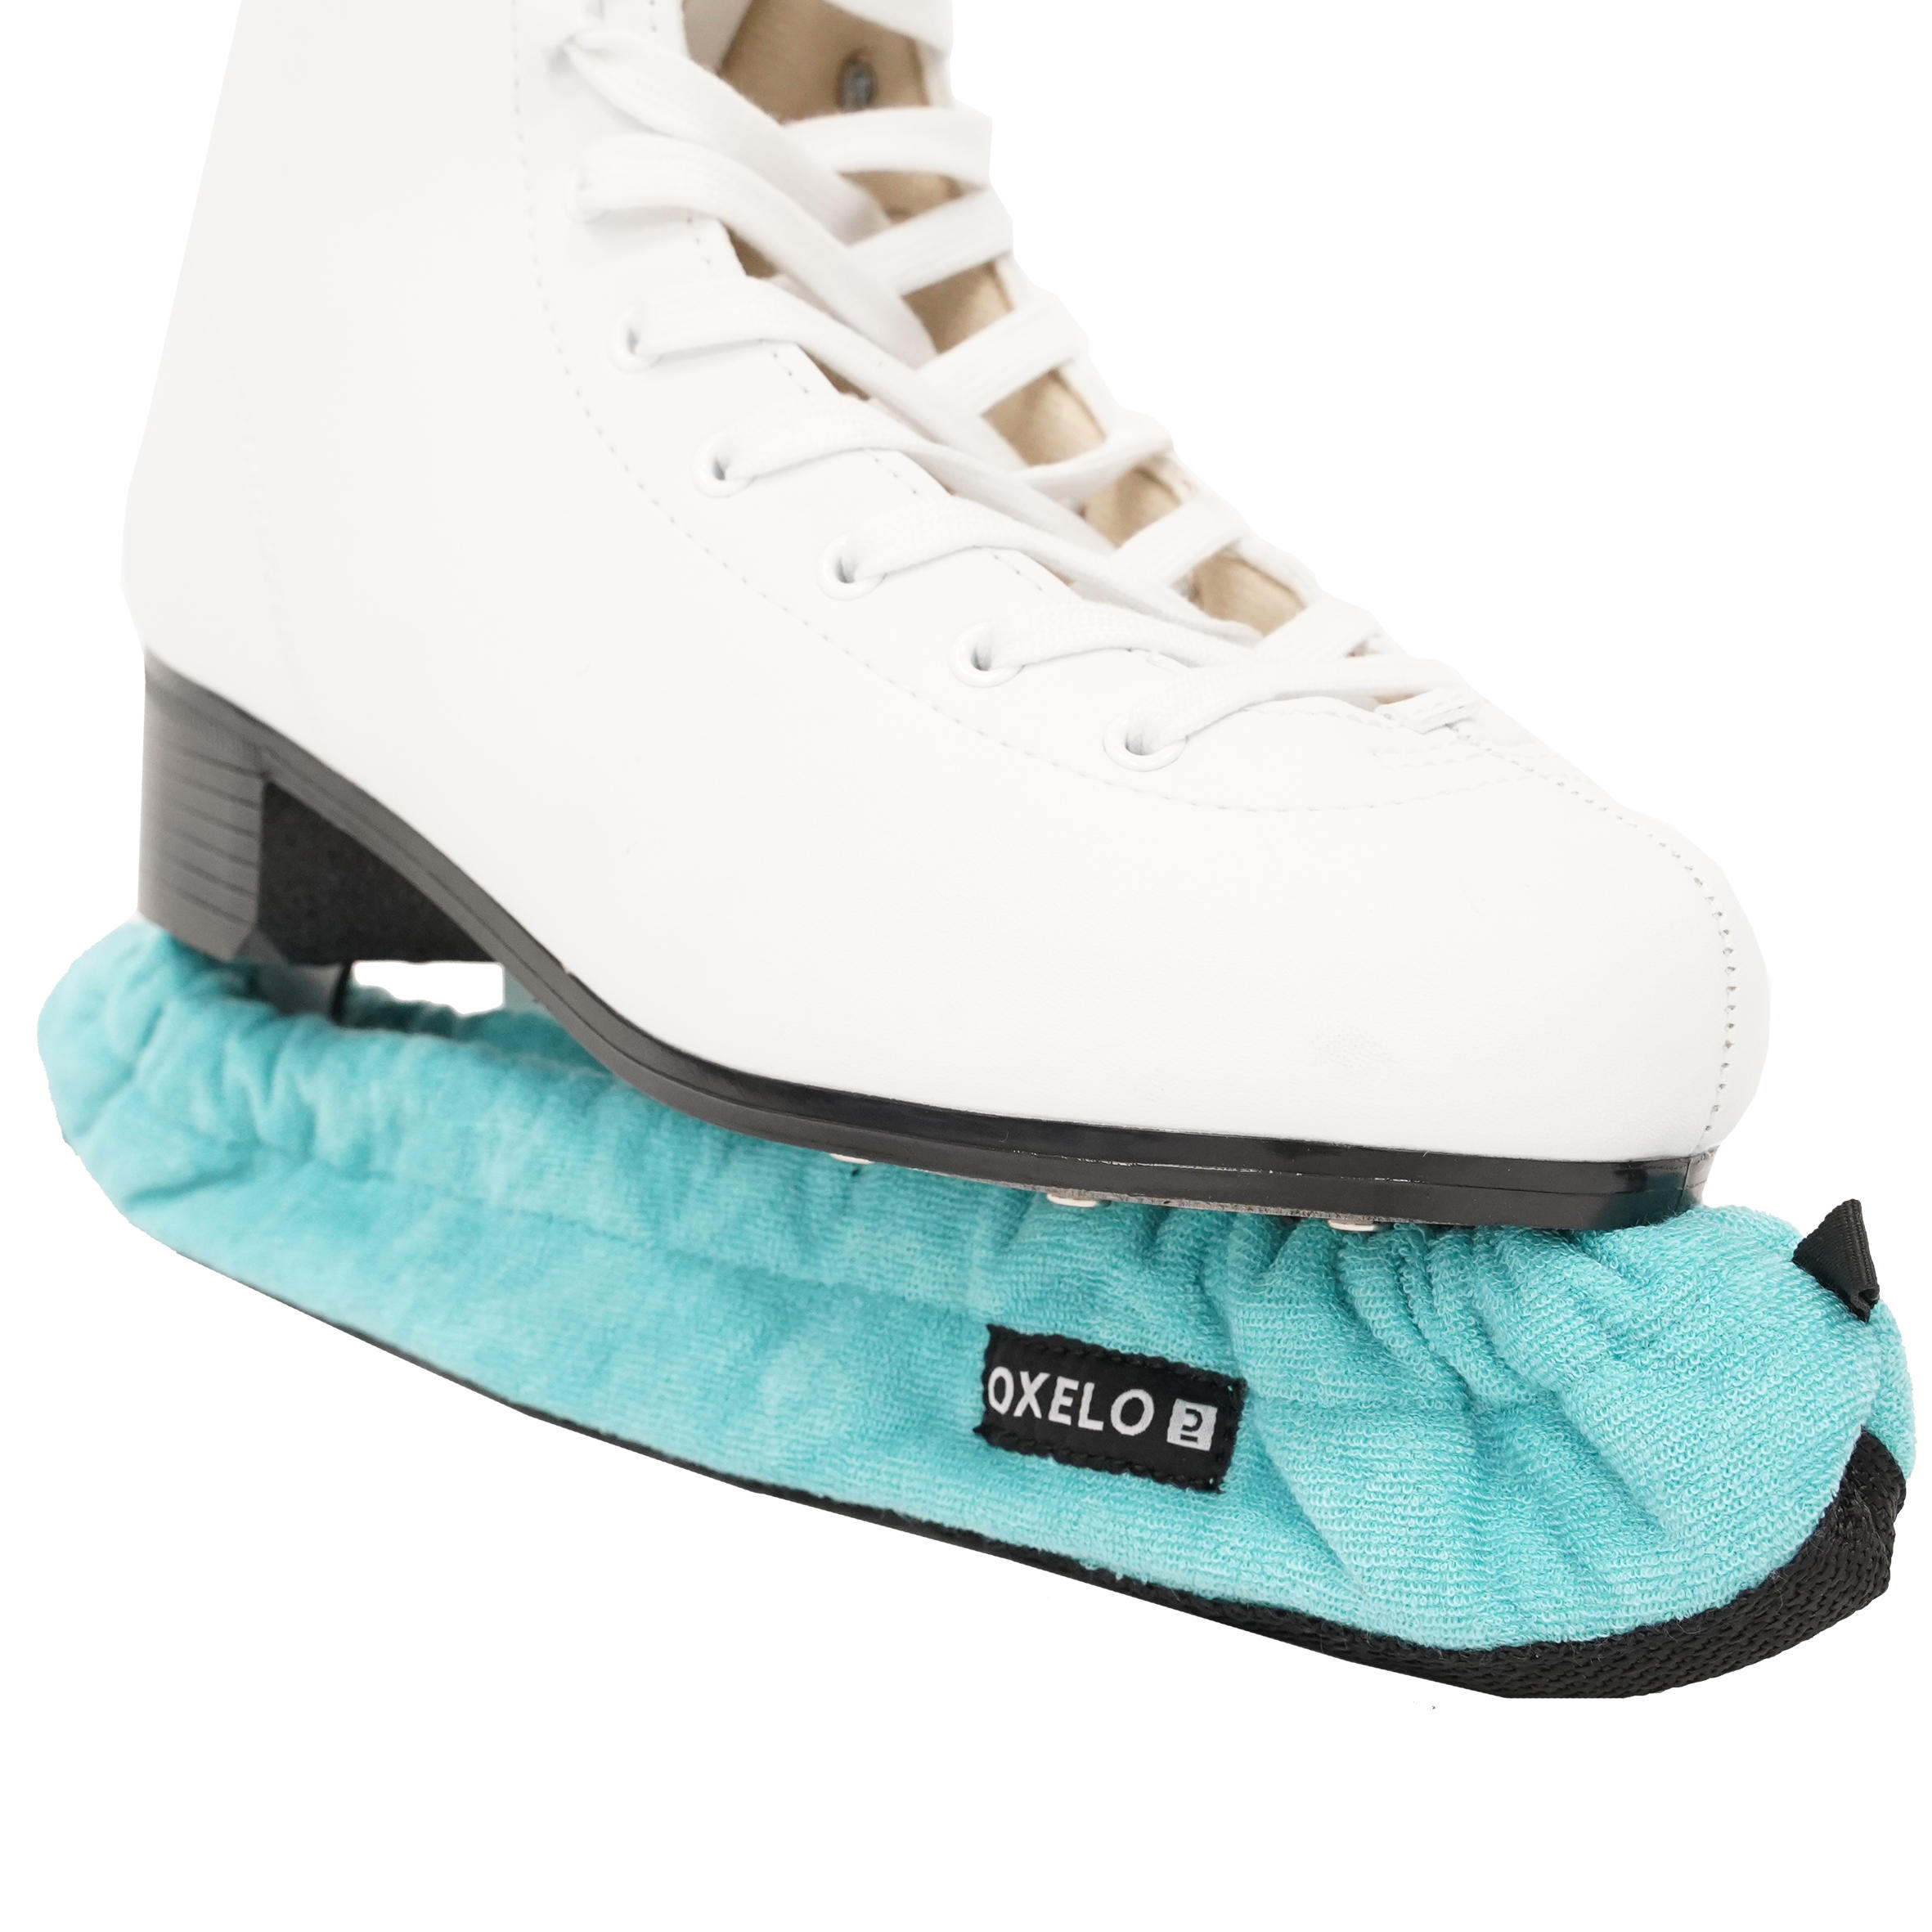 Ice Skate Blade Cover - Turquoise 2/4